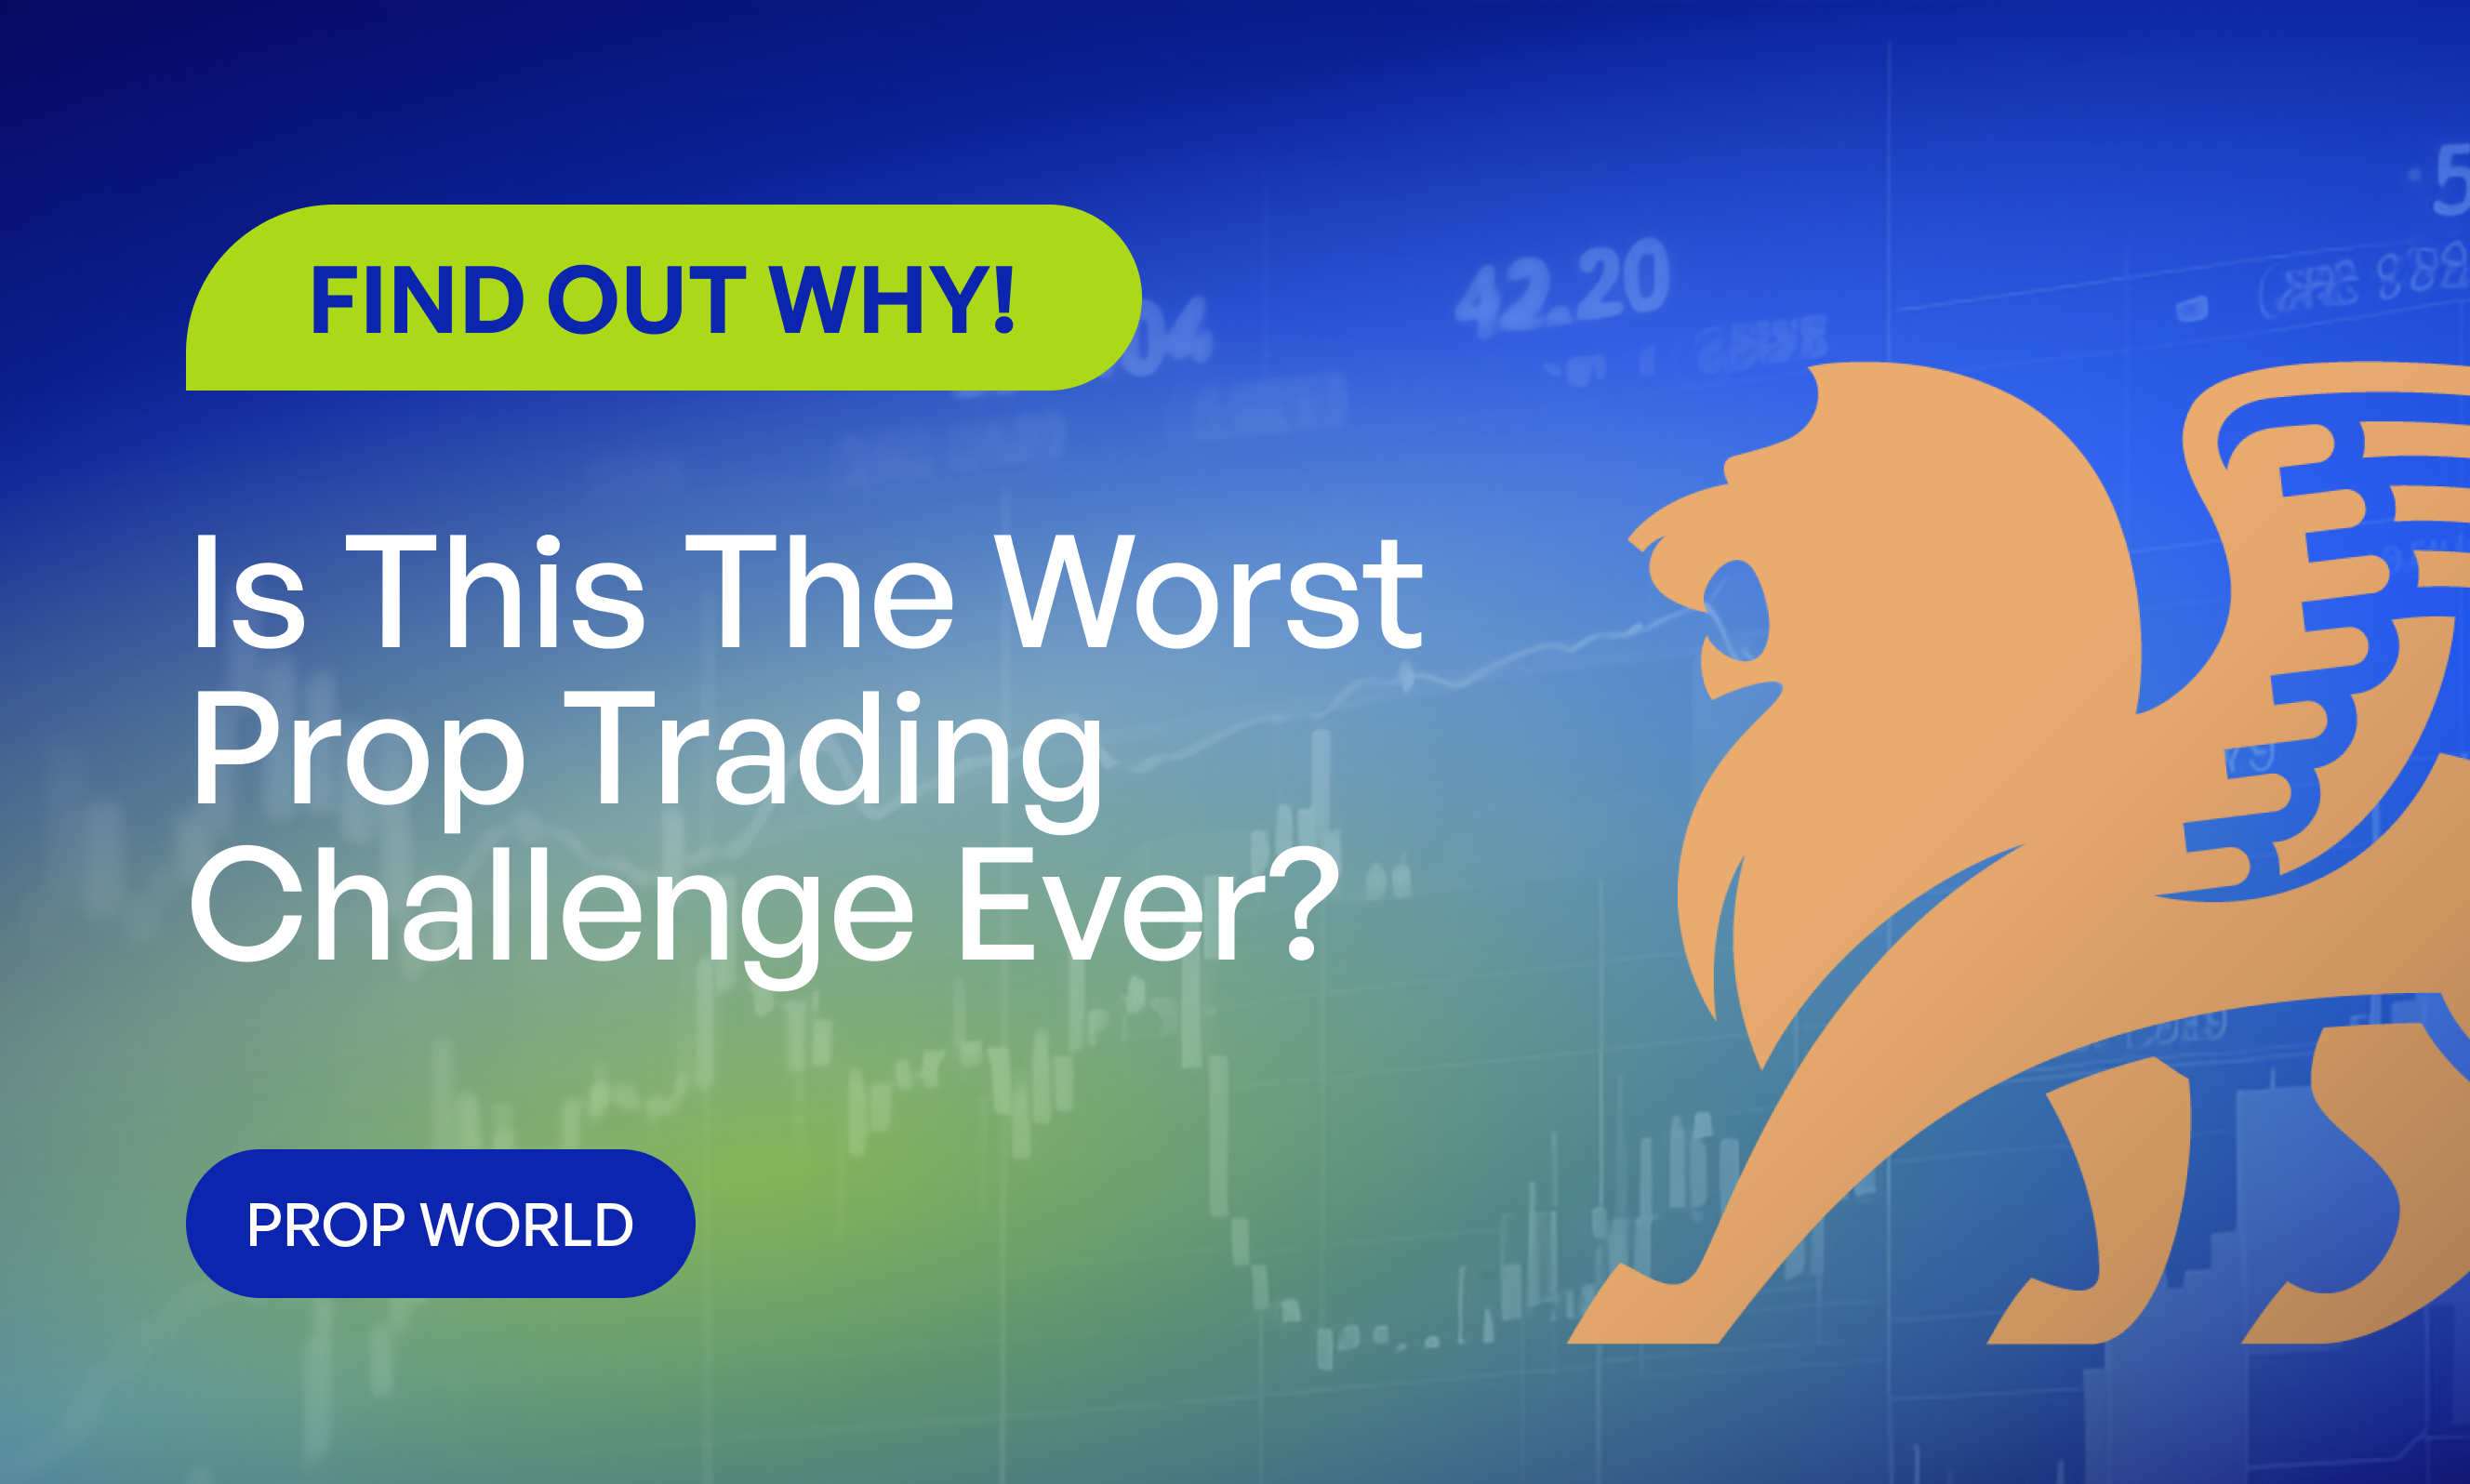 The Worst Prop Trading Challenge Ever?